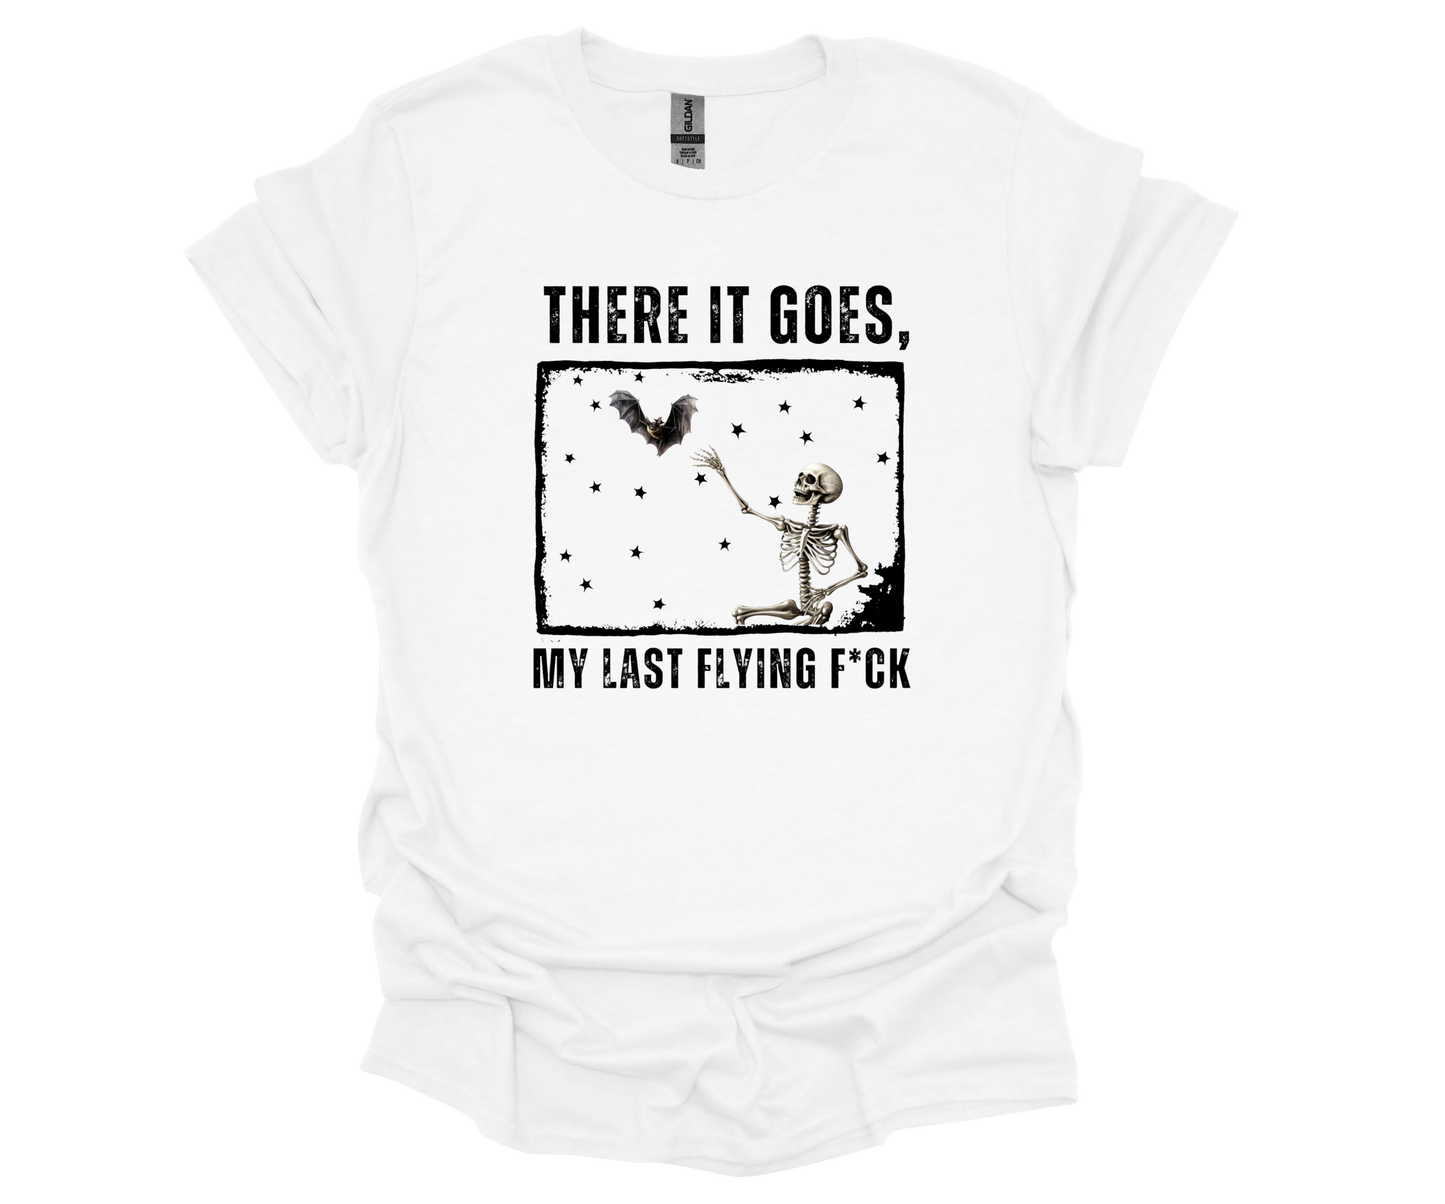 There It Goes, My Last Flying Fck Shirt - Funny Vintage Halloween Skeleton Shirt